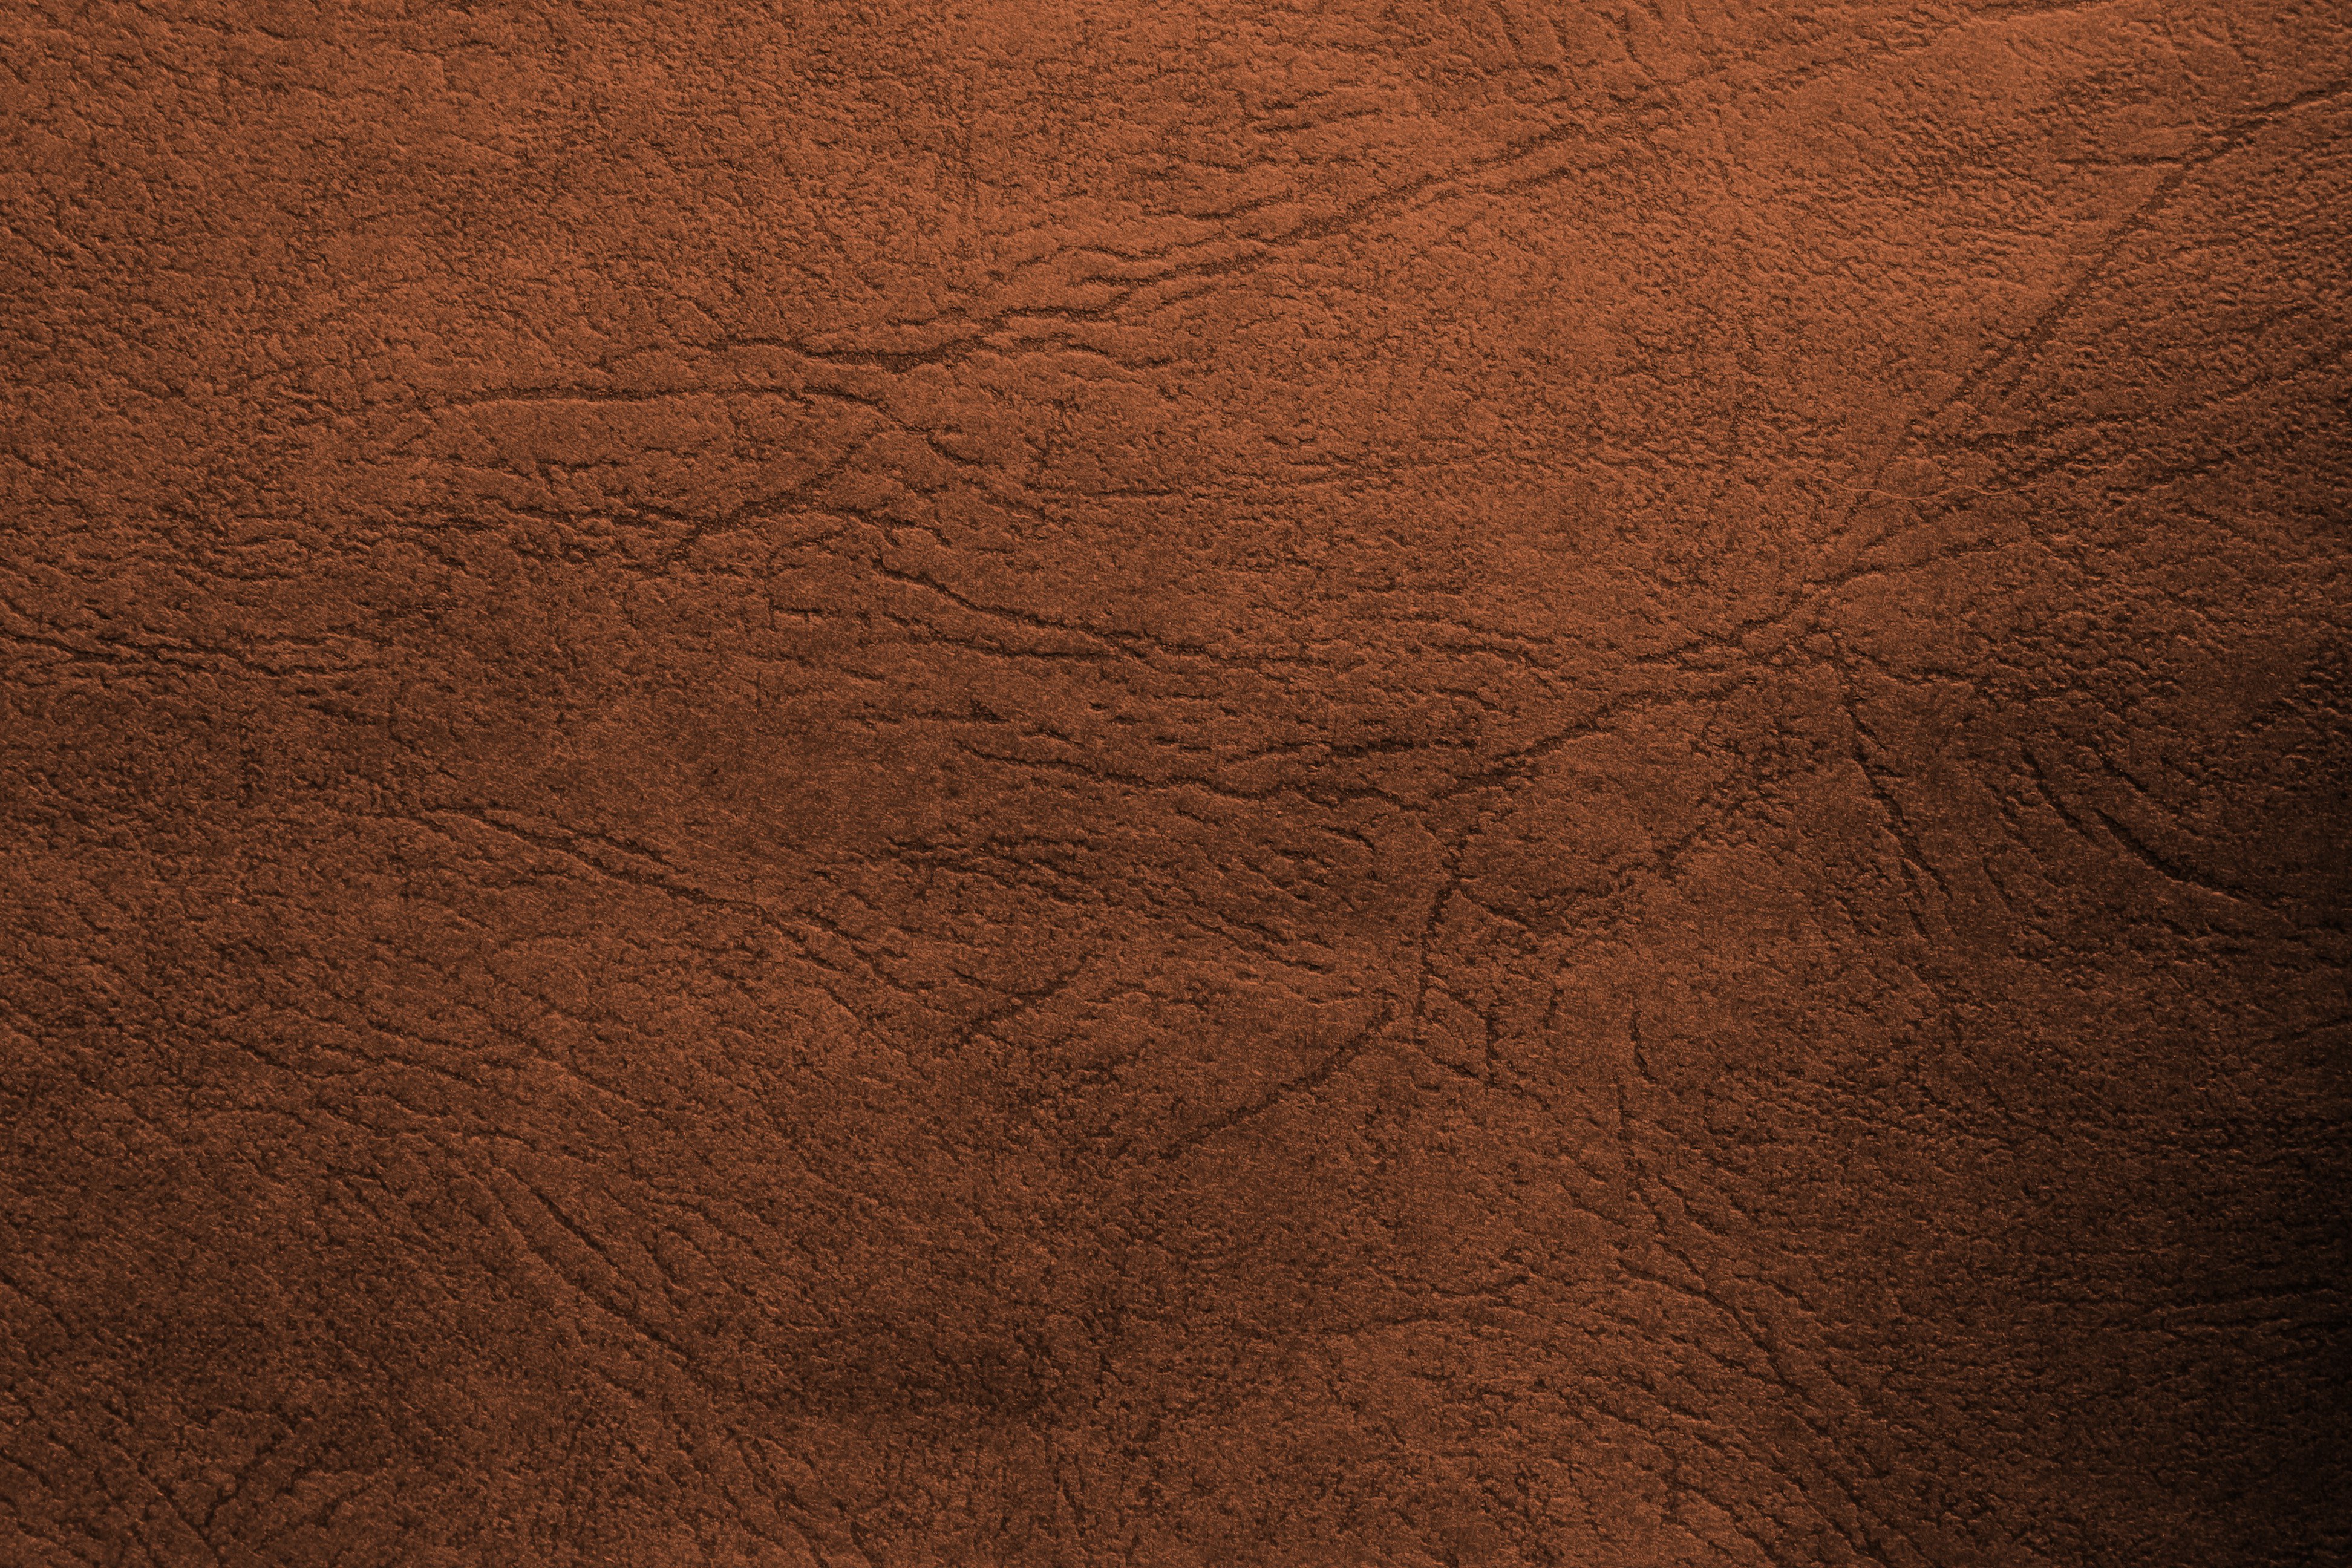 Brown leather texture photo